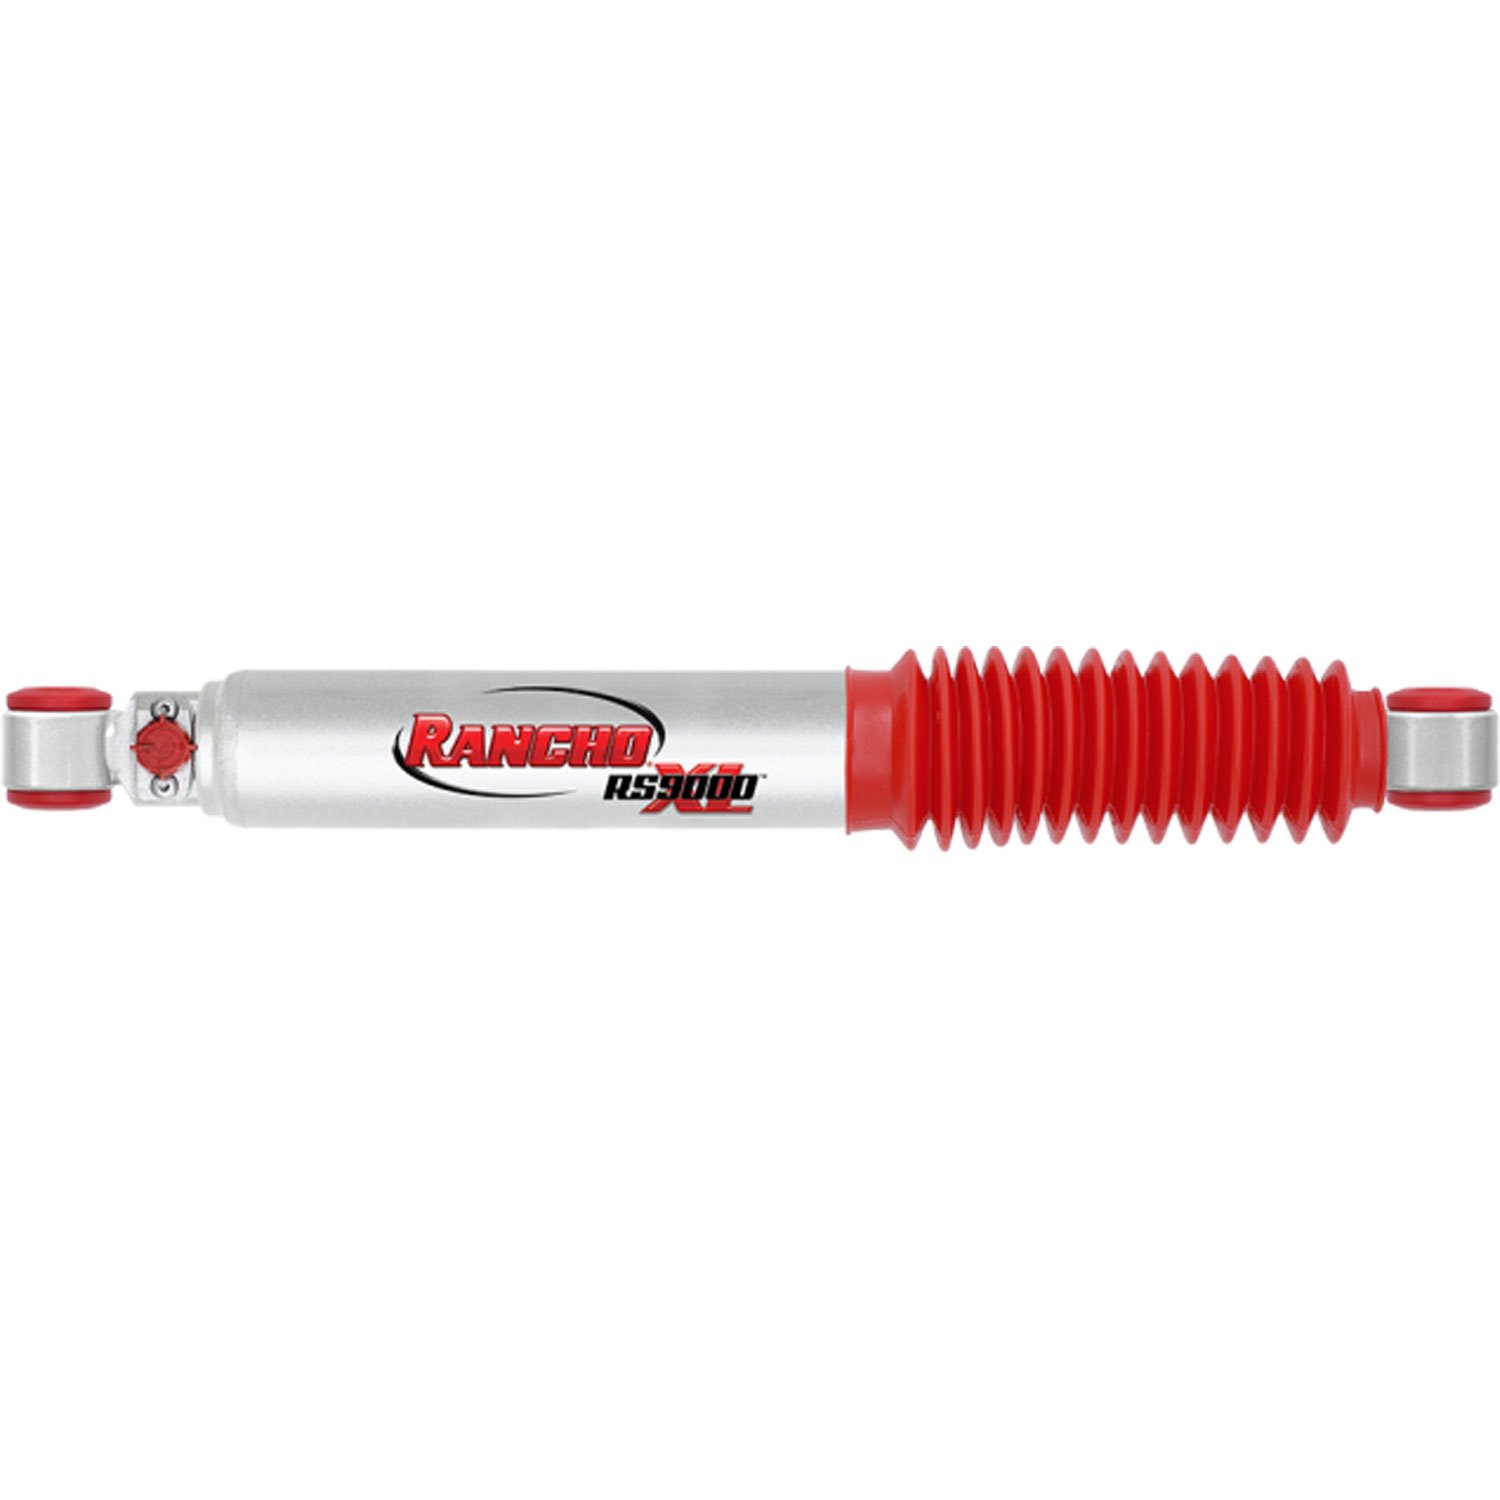 RS9000XL Rear Shock Absorber Fits Dodge Ram Pickups, Isuzu Pickups and Amigos